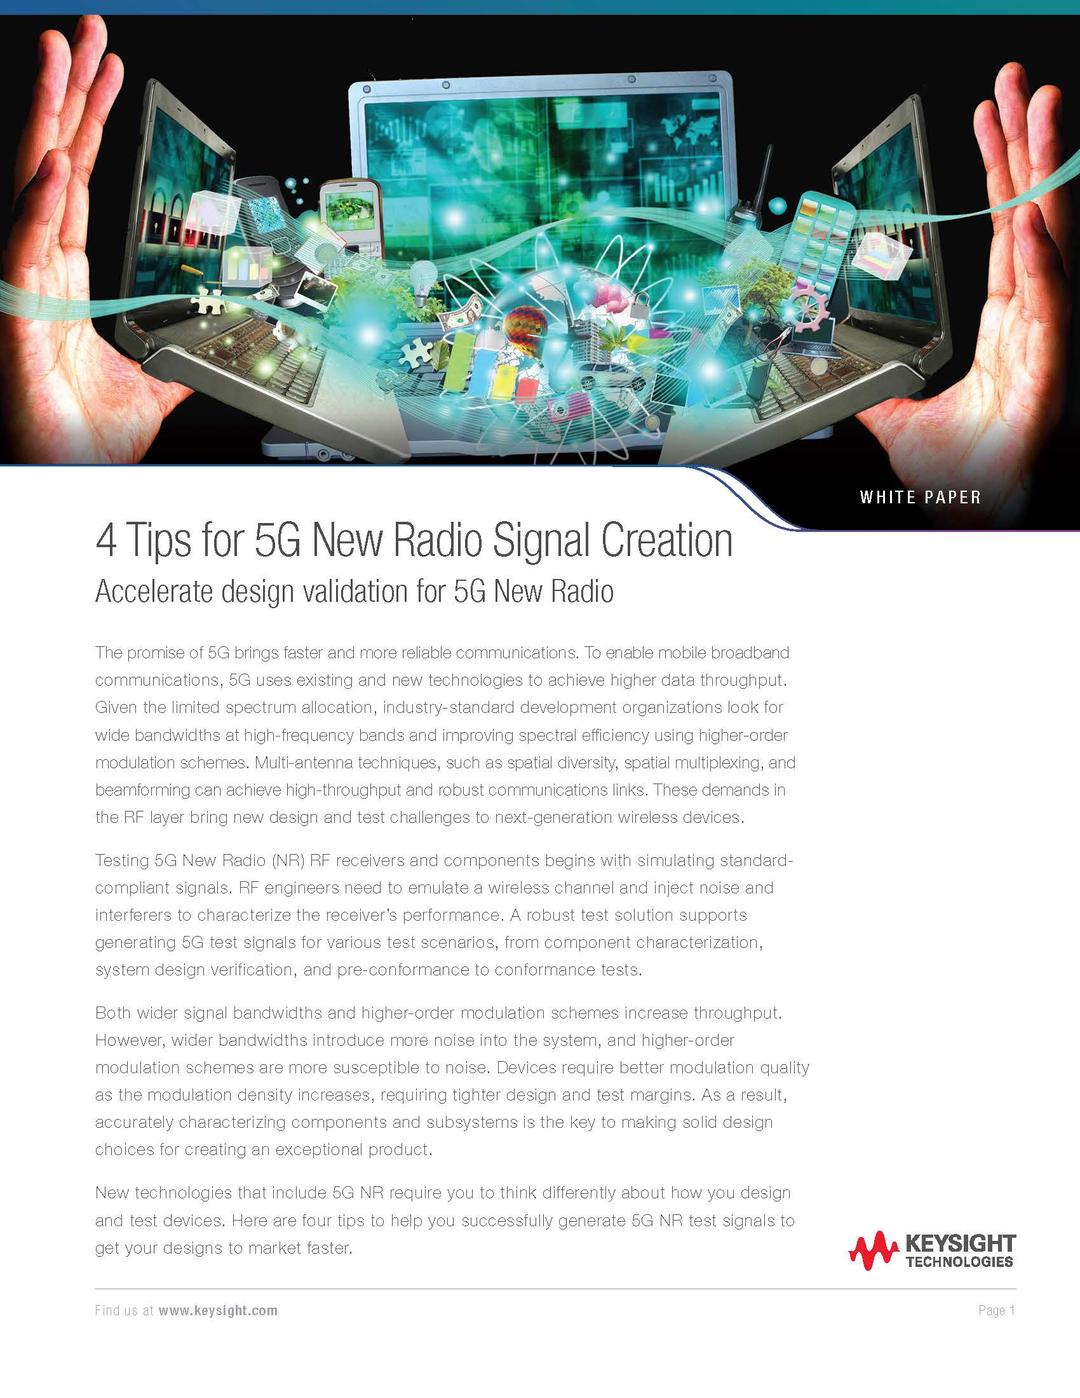 4 Tips for 5G New Radio Creation, image